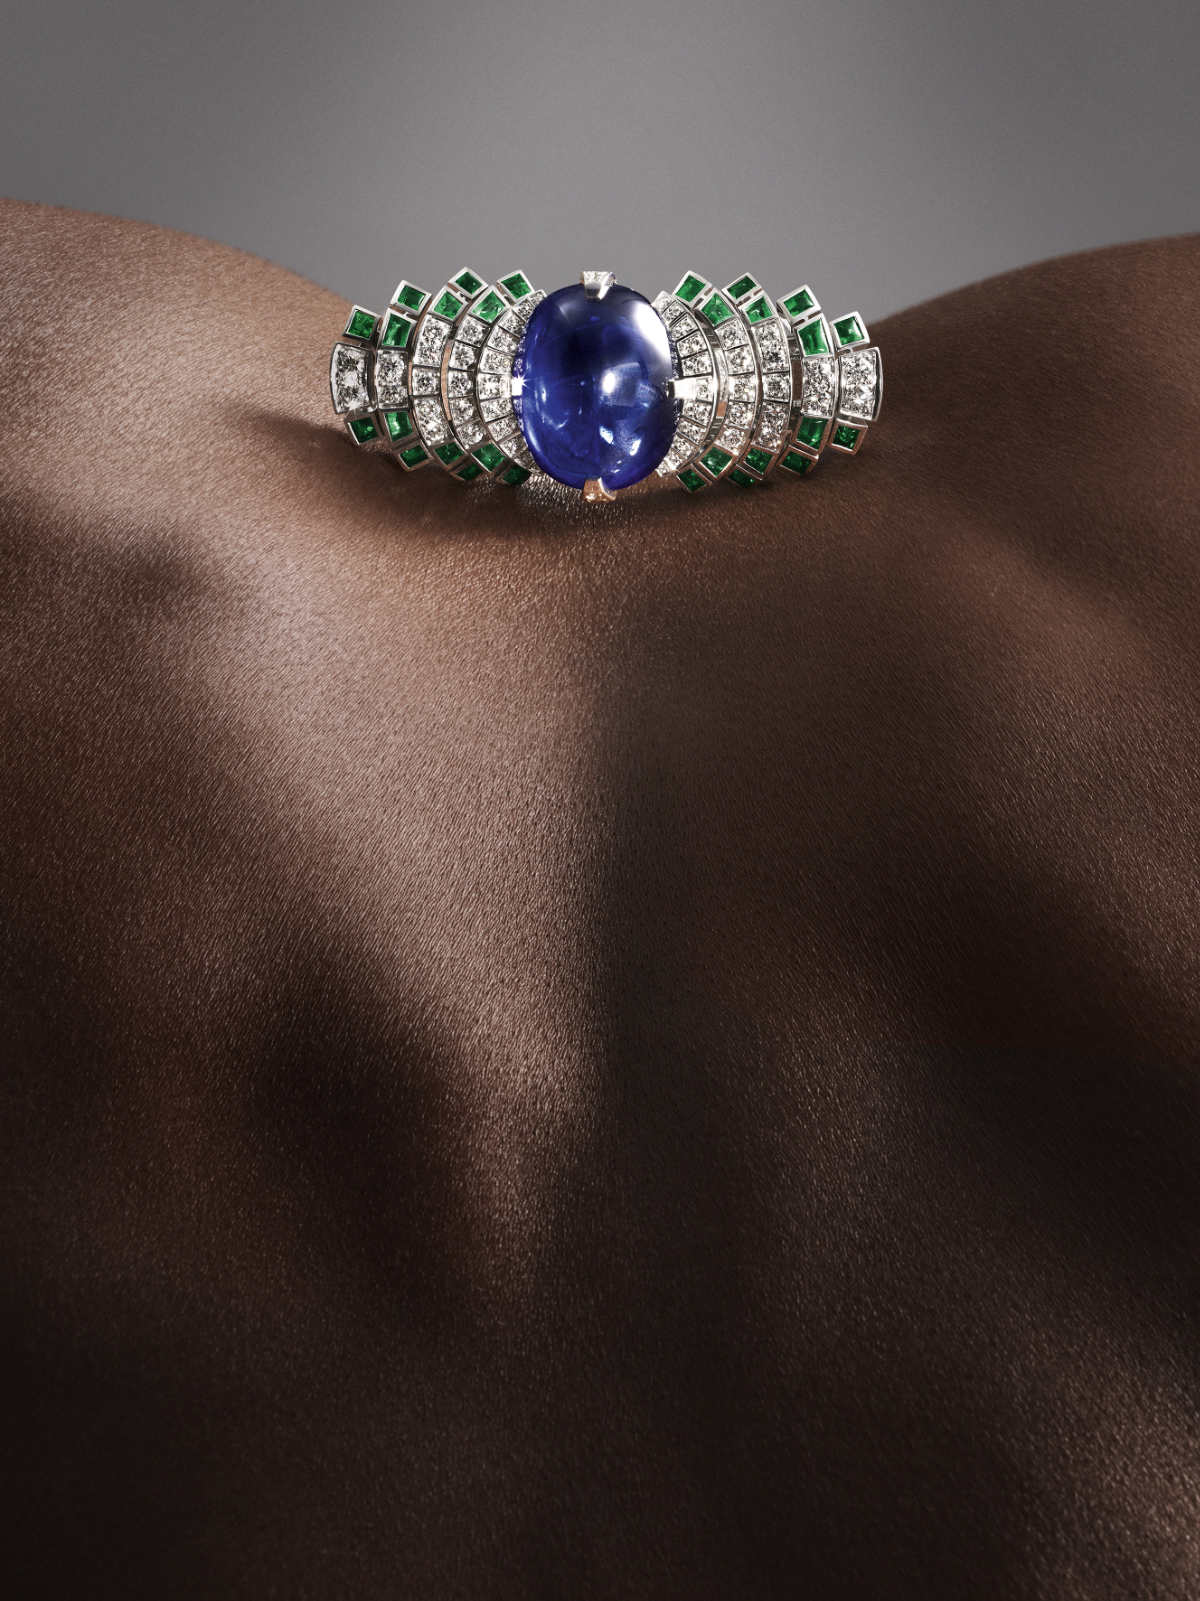 The rings in the Sixième Sens par Cartier High Jewellery collection